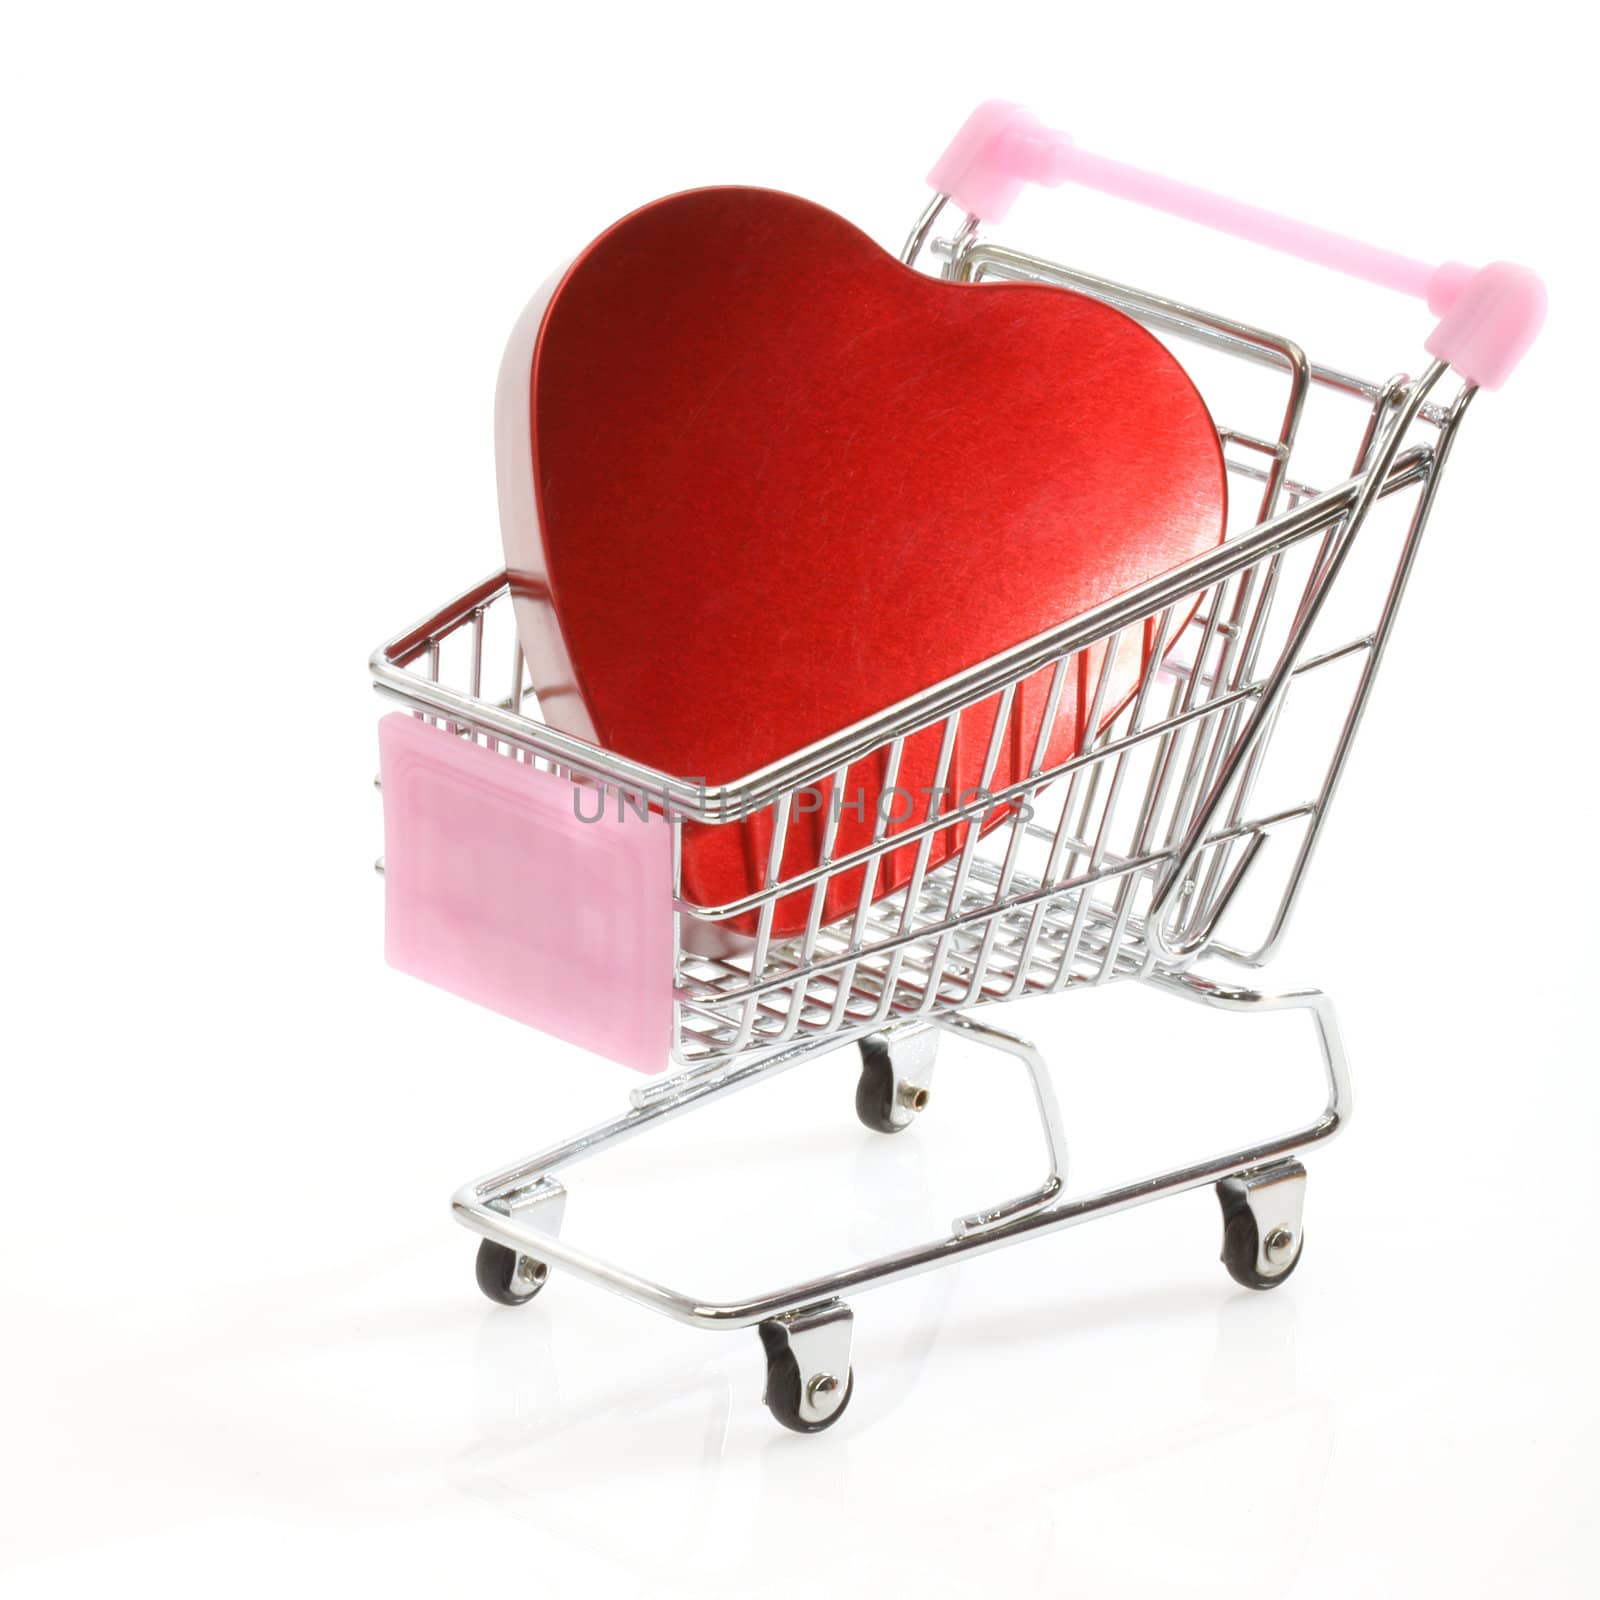 Red heart in shopping cart over white